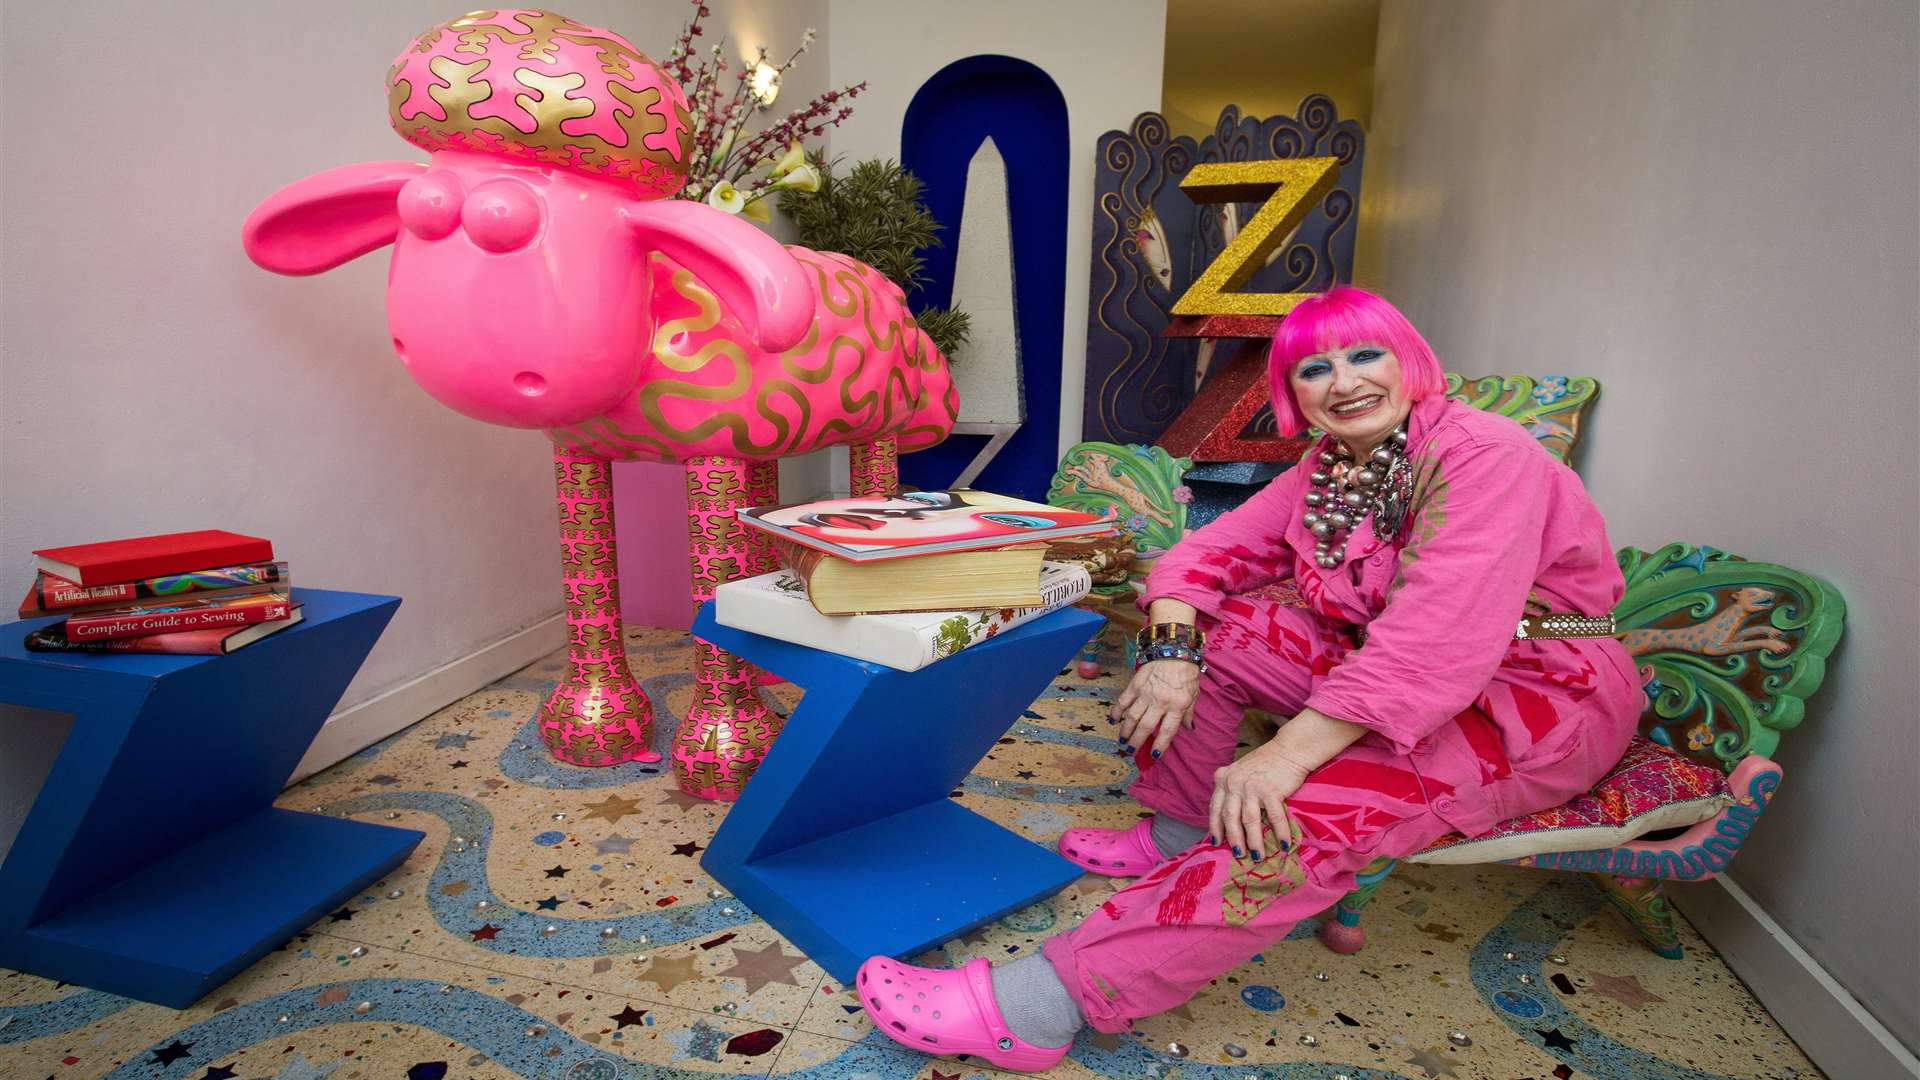 Zandra Rhodes is one of the high profile artists who has designed a 5ft tall Shaun the Sheep sculpture